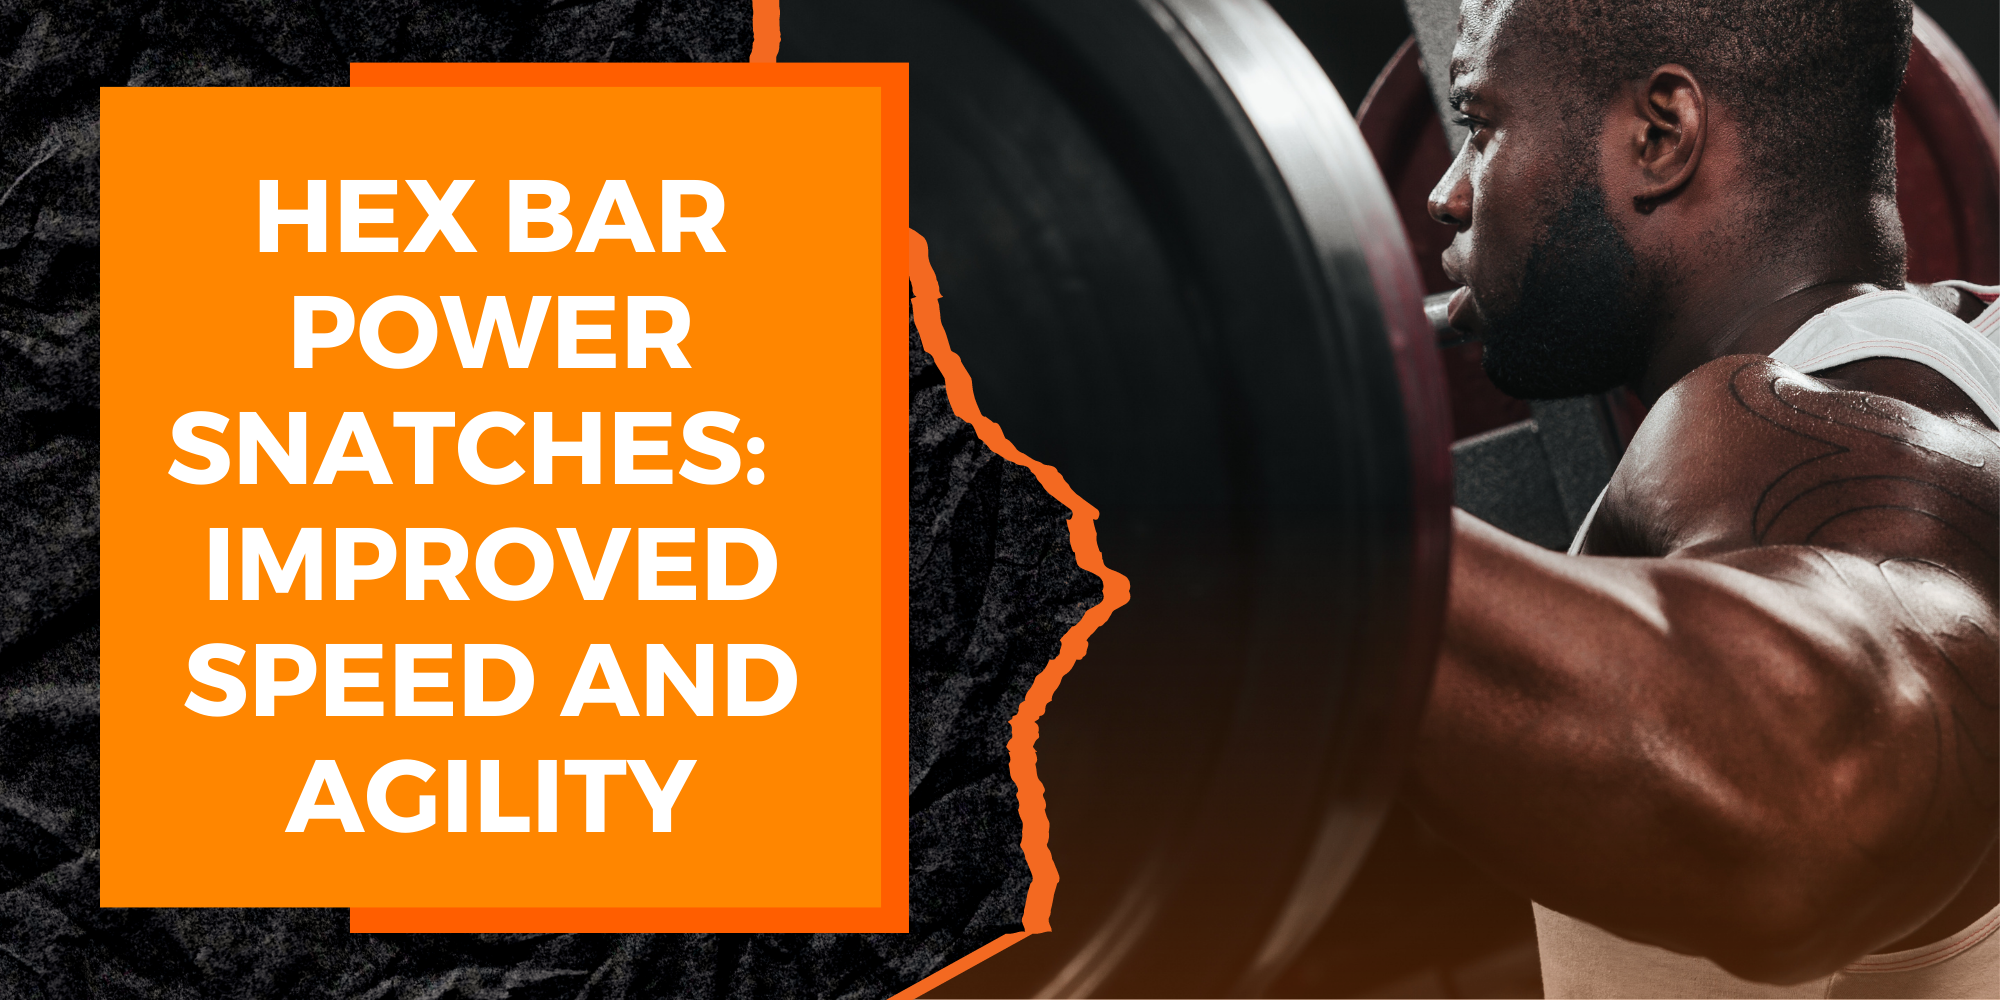 Hex Bar Power Snatches: An Exercise for Improved Speed and Agility